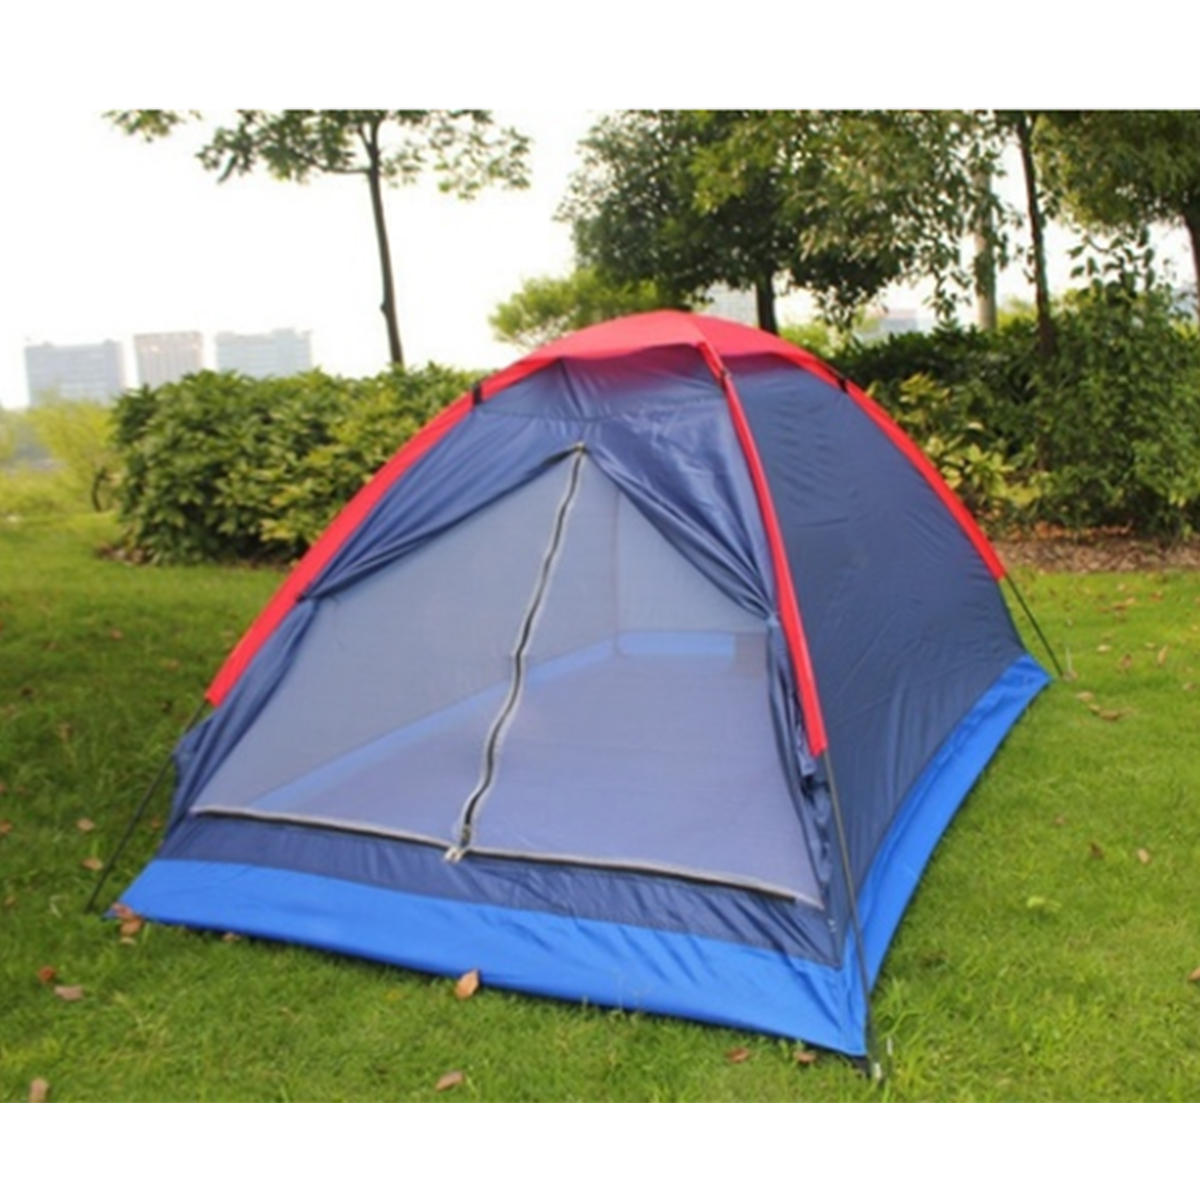 2 Persons Camping Tent Single Layer Beach Tent Outdoor Travel Windproof Waterproof Awning Tent Summer Tent with Bag Random Color